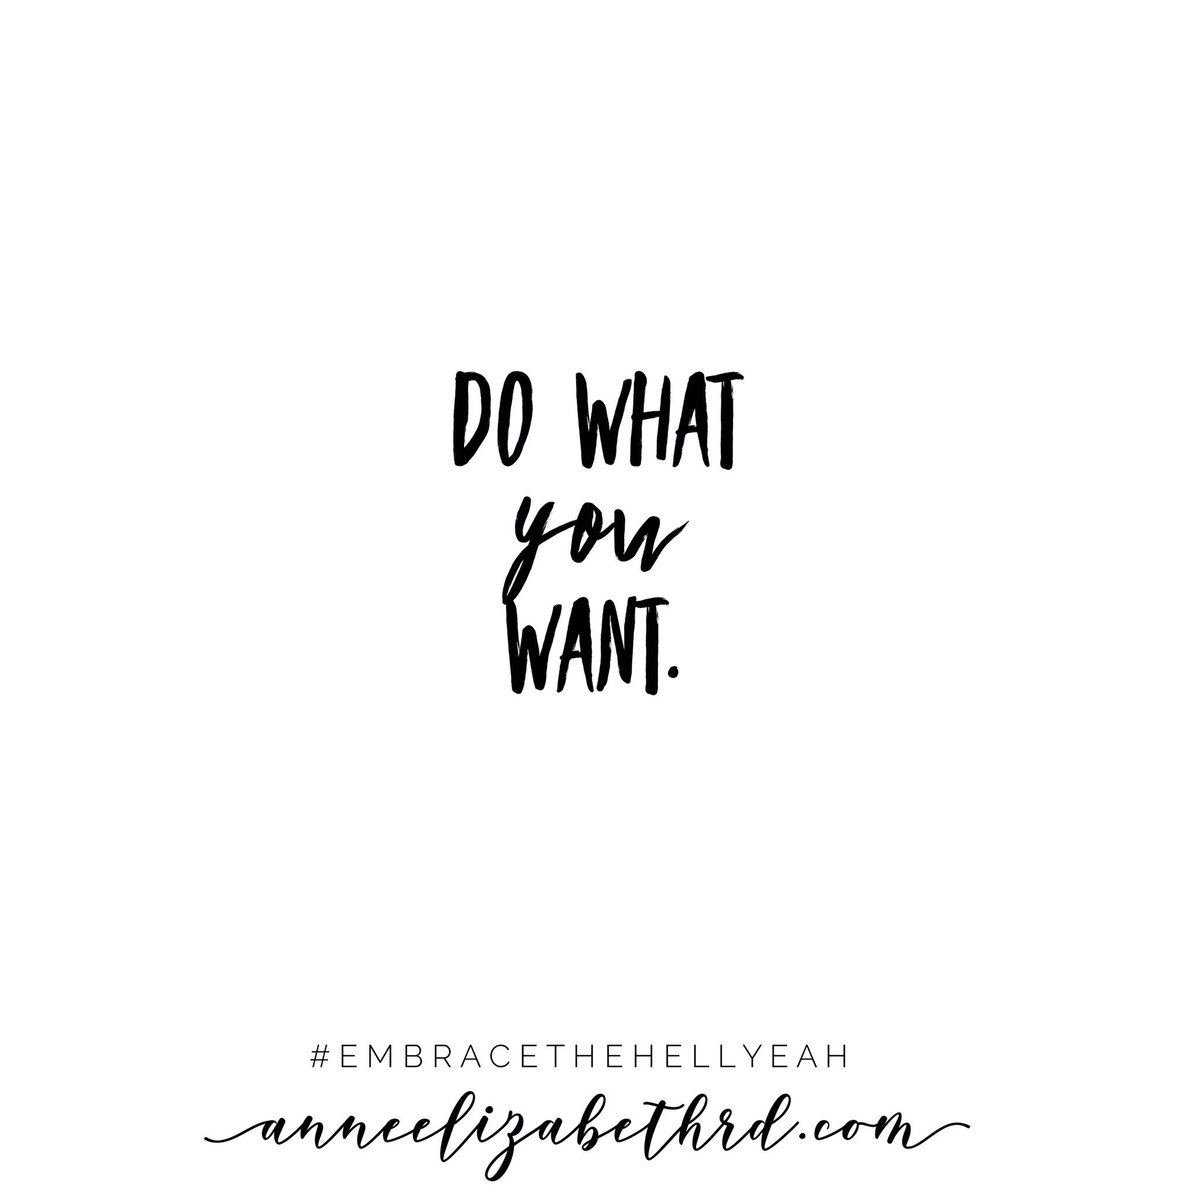 Nutritional Noshes: #WeeklyWisdom and 'Do What You Want' Nosh : annecundiffrd.blogspot.com/2019/01/weekly… #blog #embracethehellyeah #lessstuffmorelife 🍒